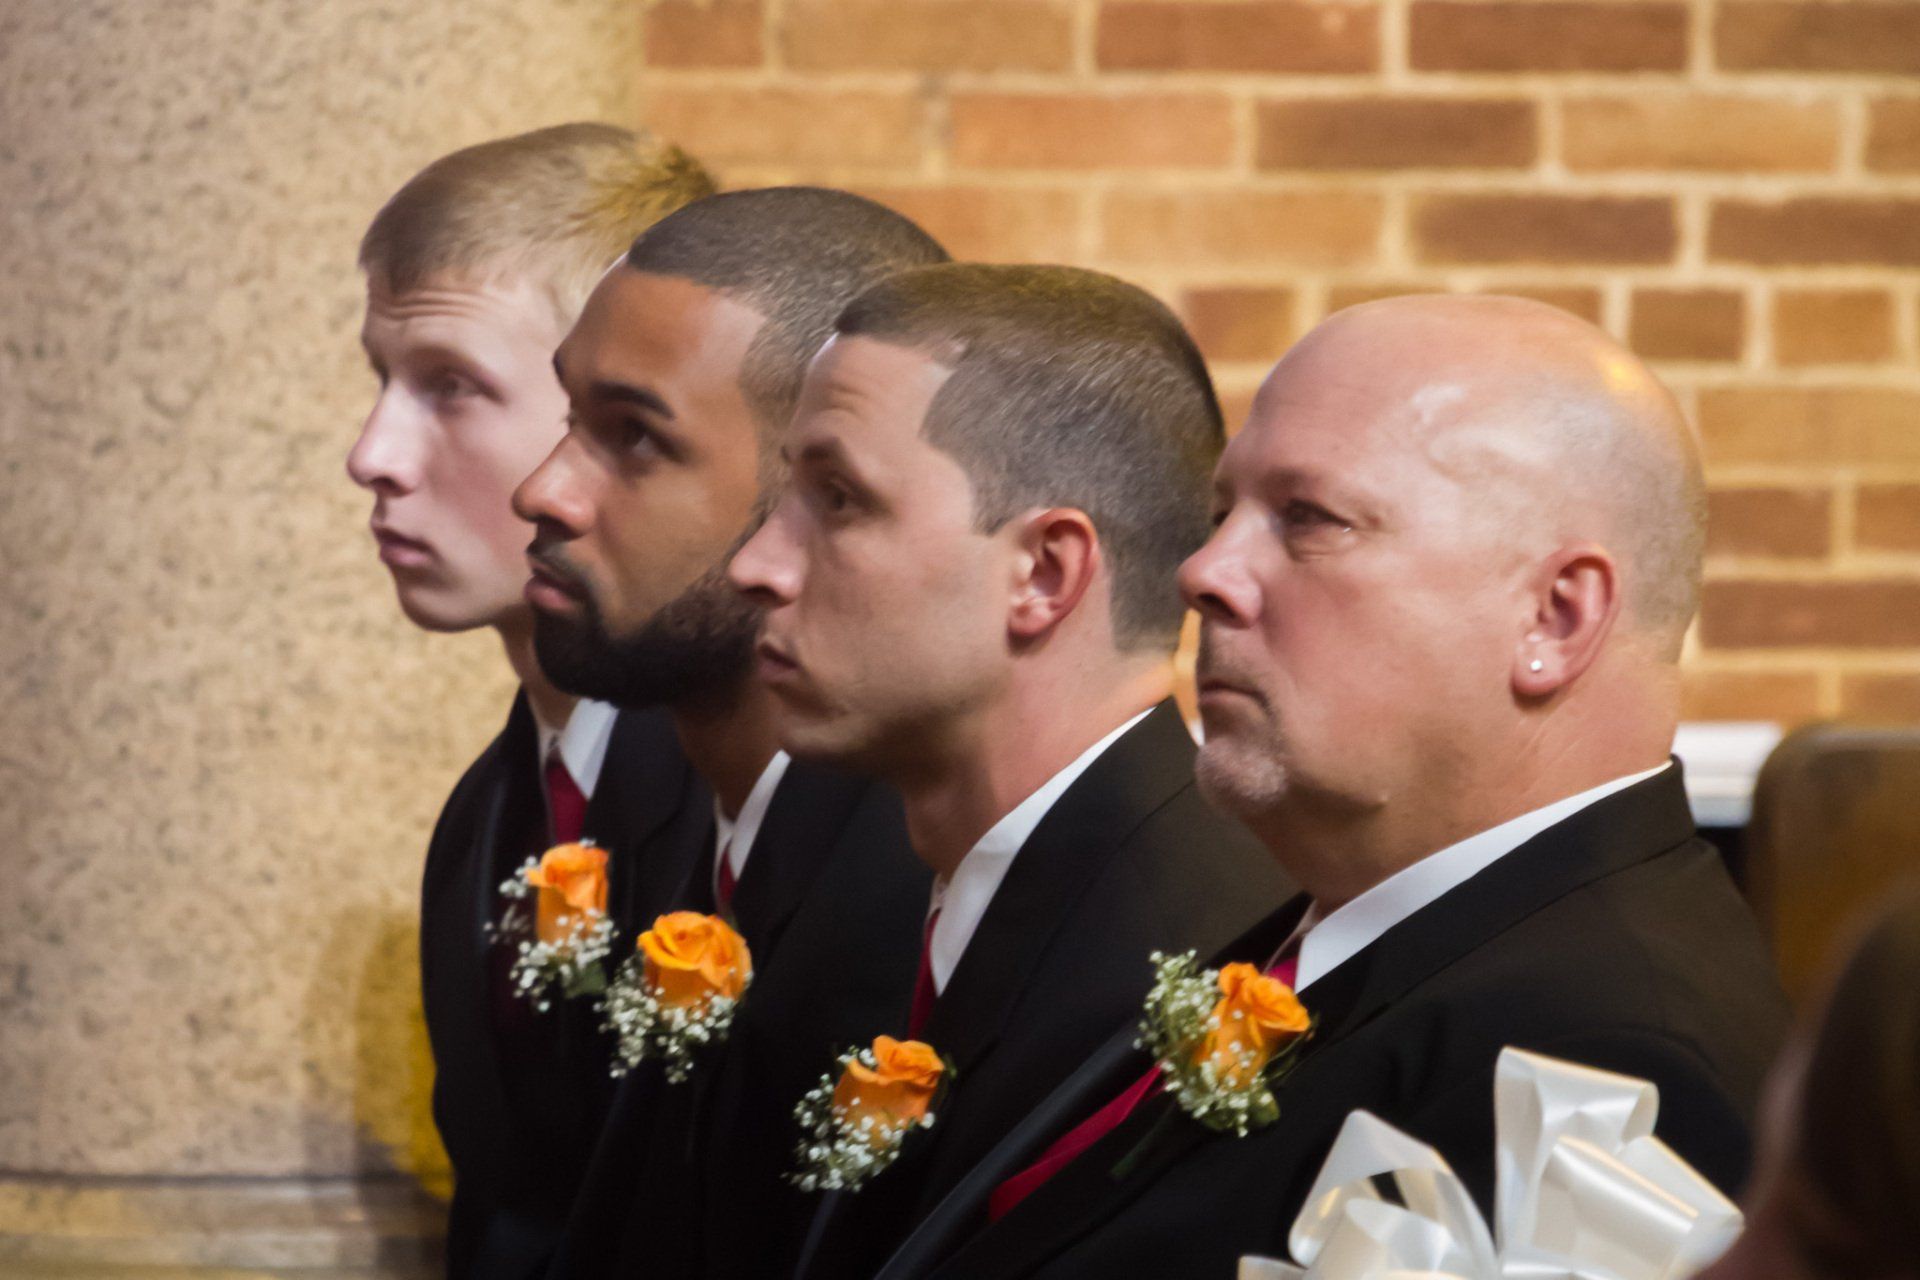 A side view of all the groomsmen seated in a line on a pew in their black tuxedos